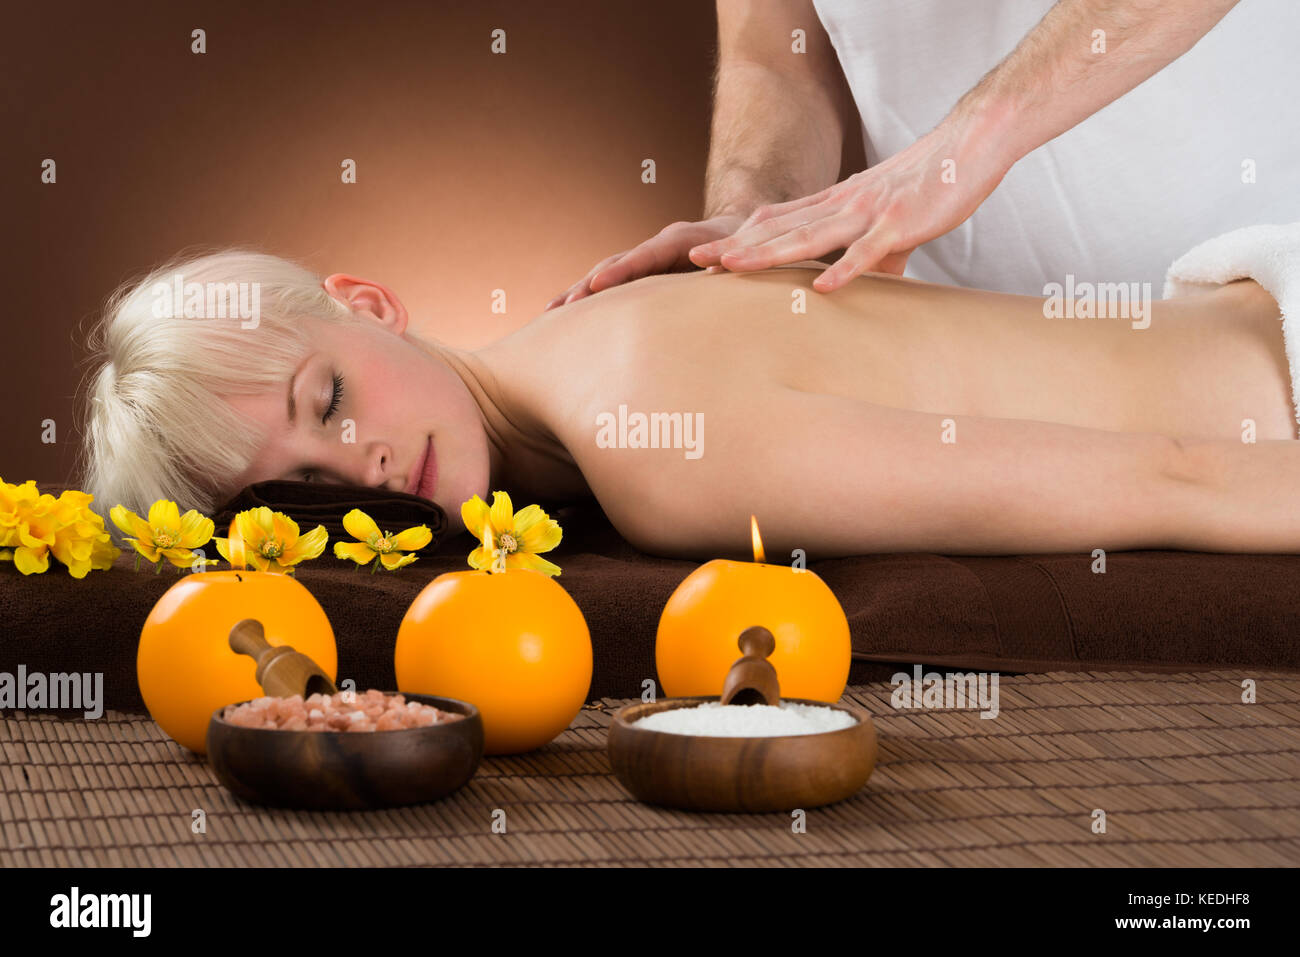 Smiling Young Woman Receiving Shoulder Massage From A Massager In A Beauty Spa Stock Photo